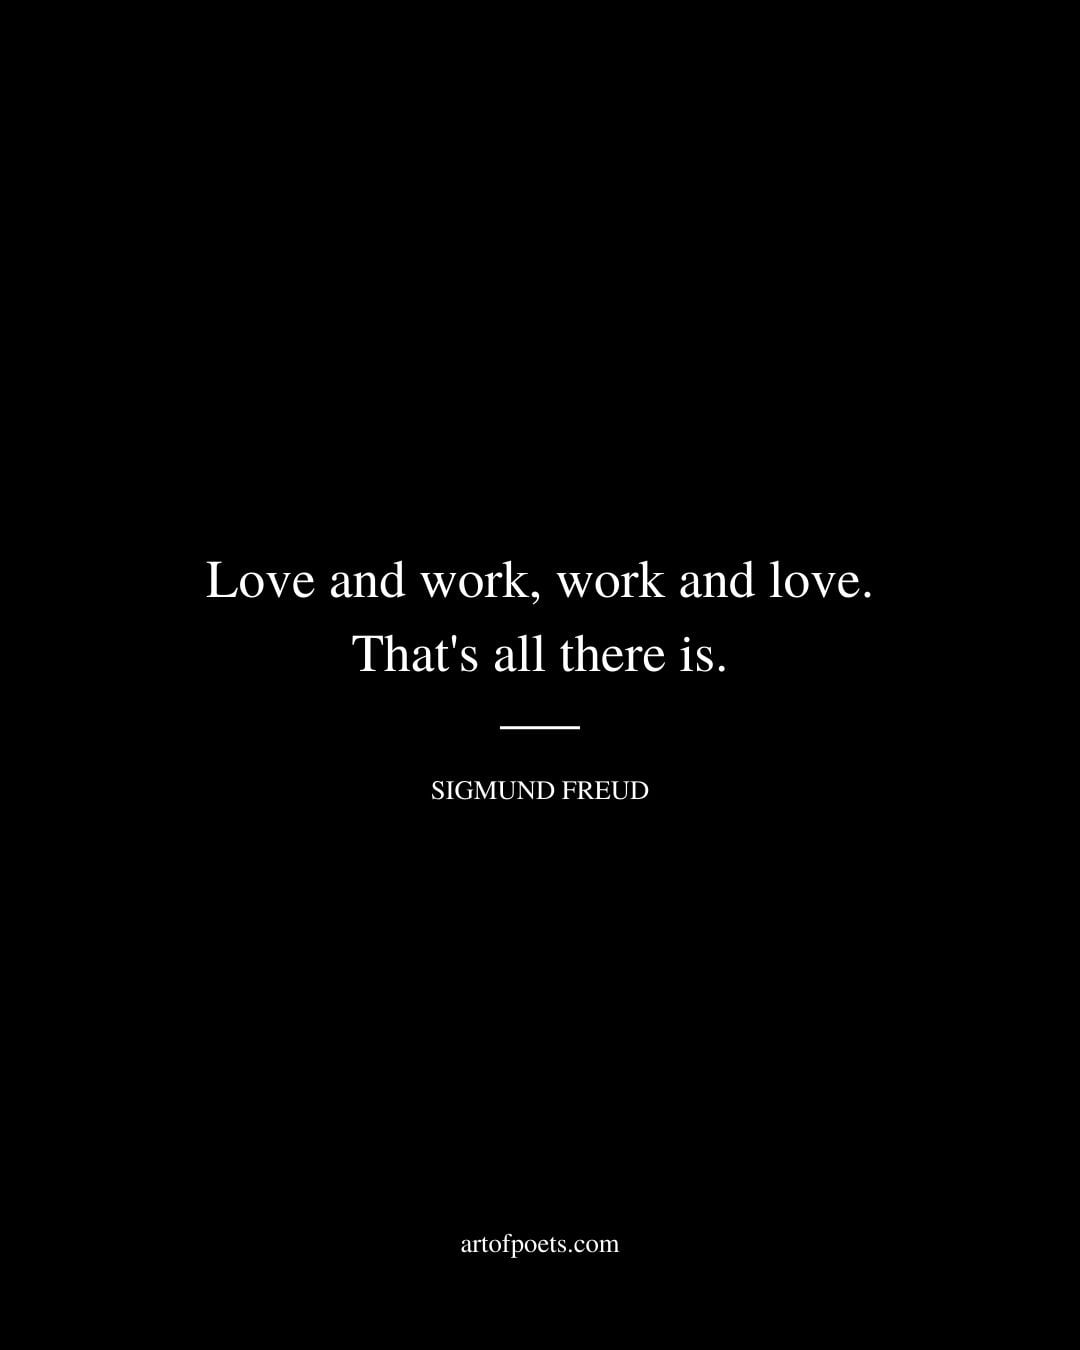 Love and work work and love. Thats all there is